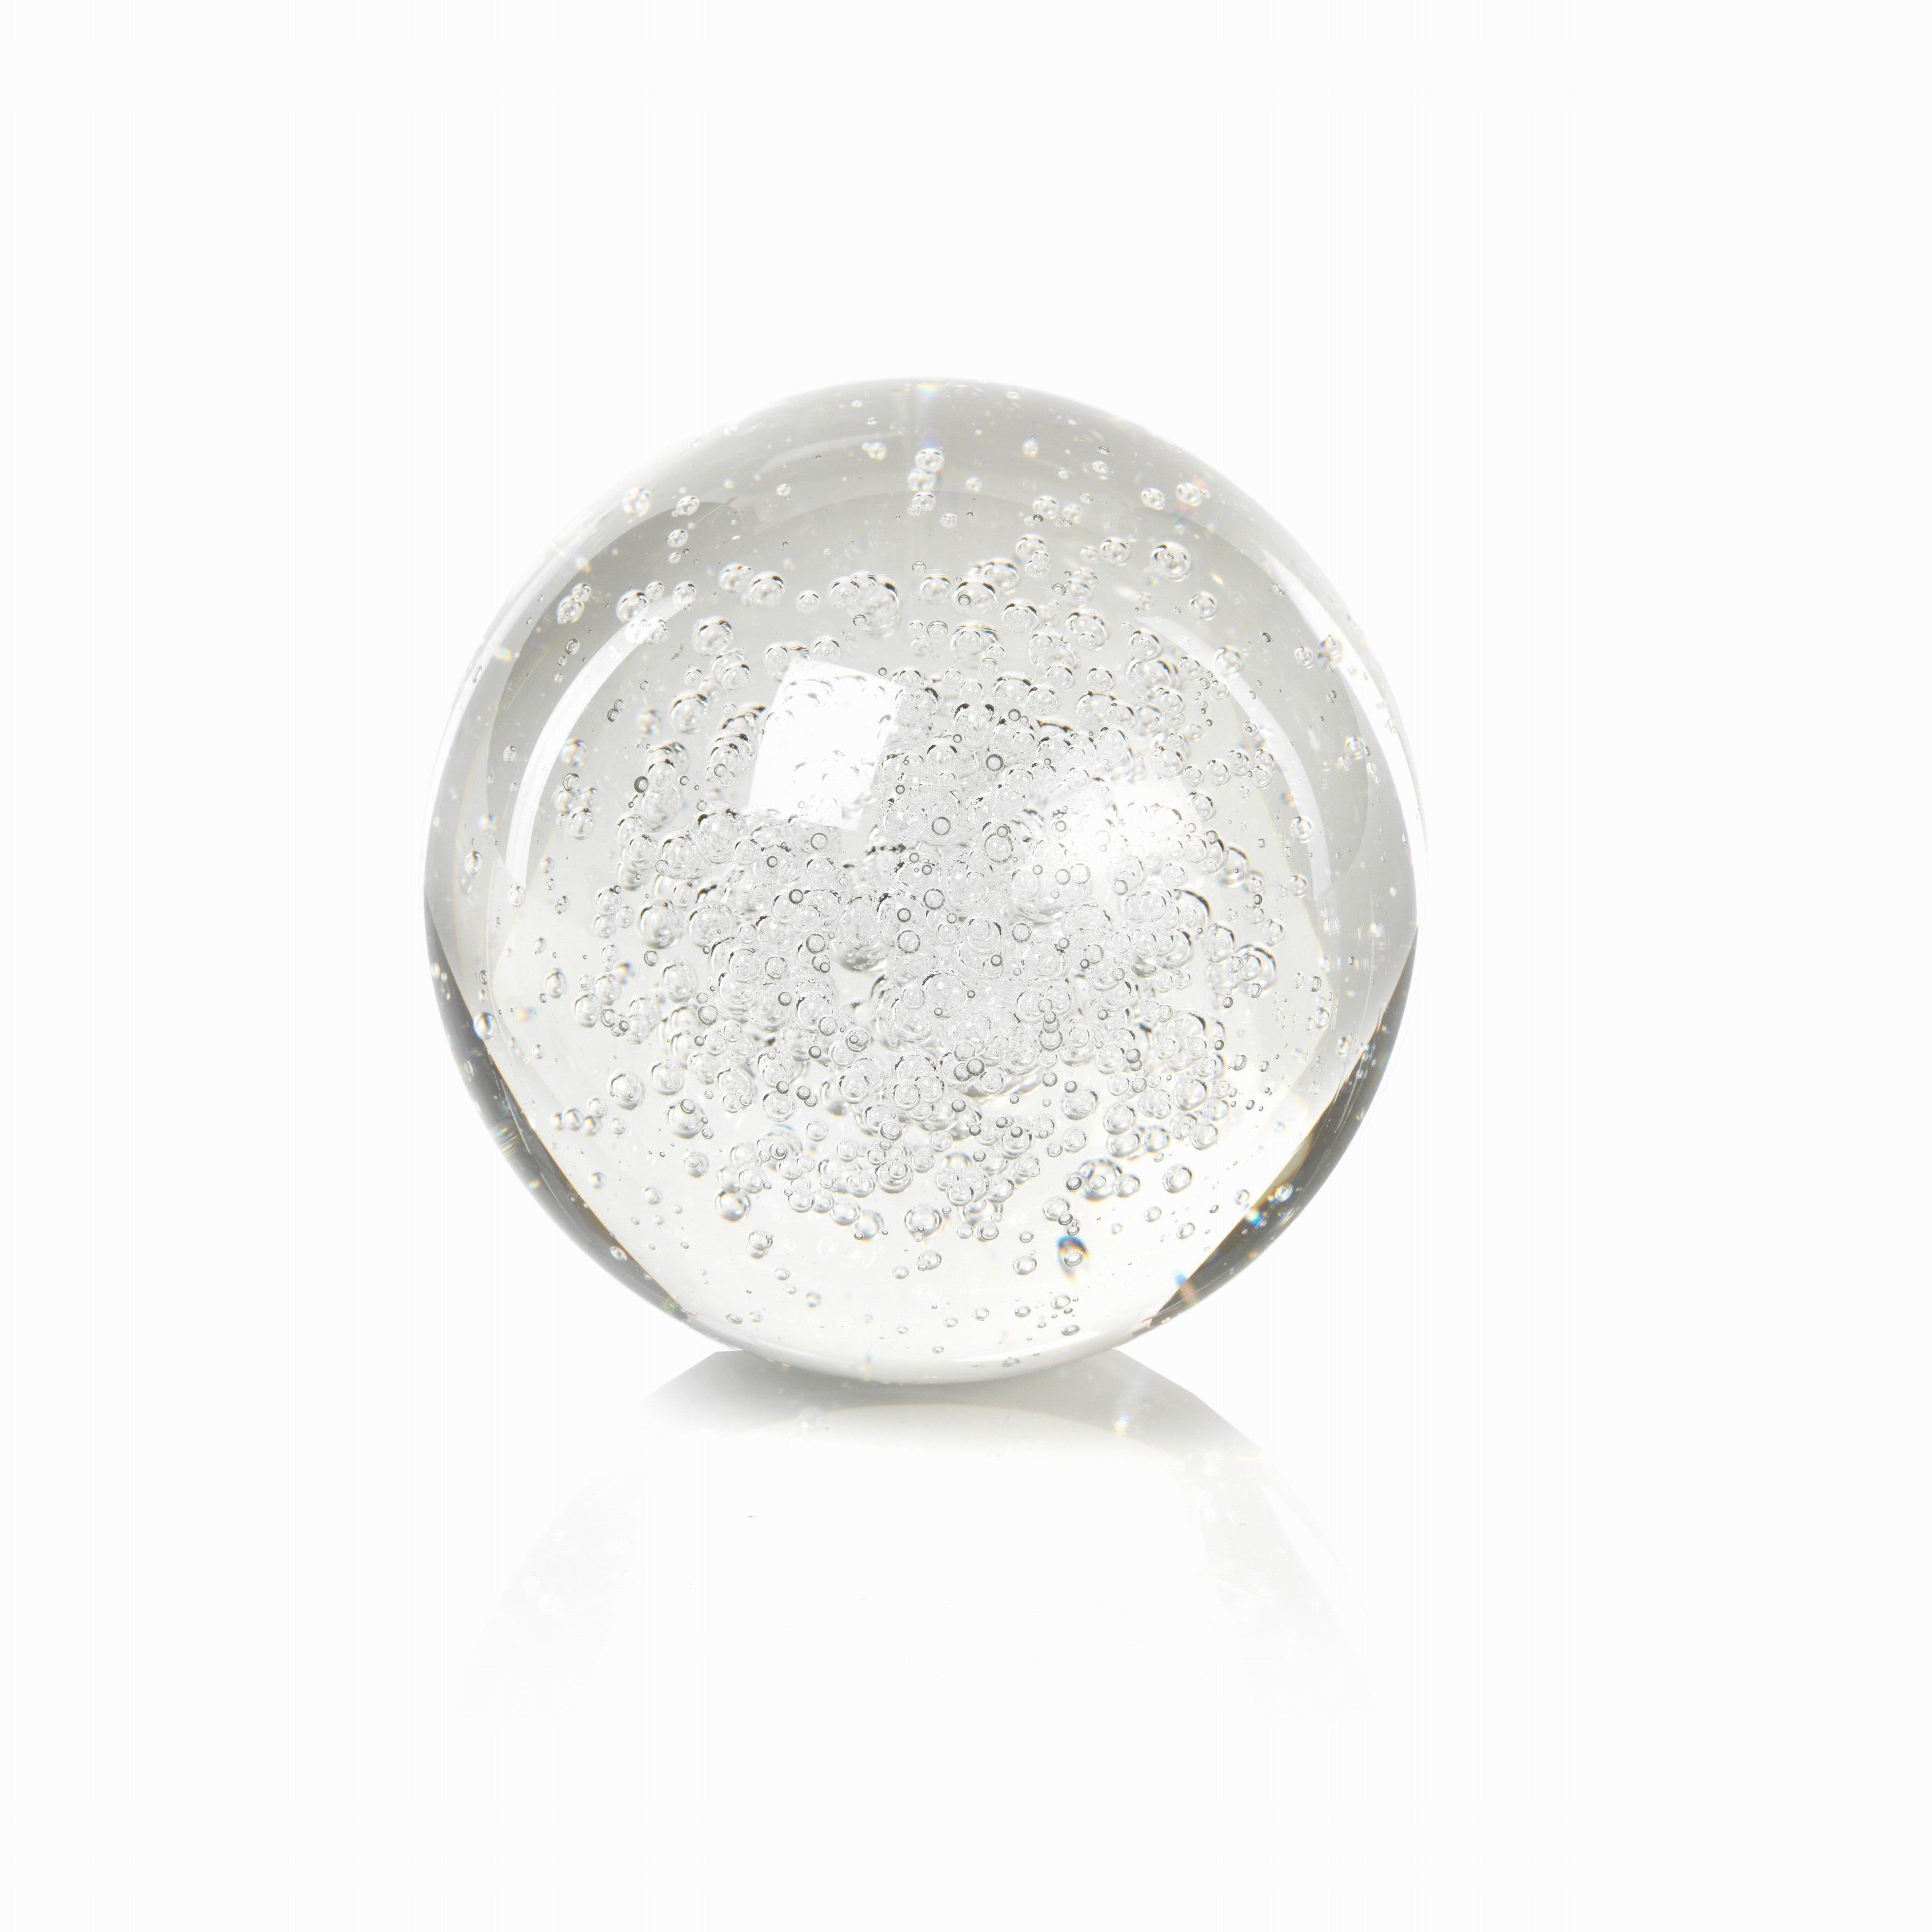 Crystal Fill Ball with Bubbles - CARLYLE AVENUE